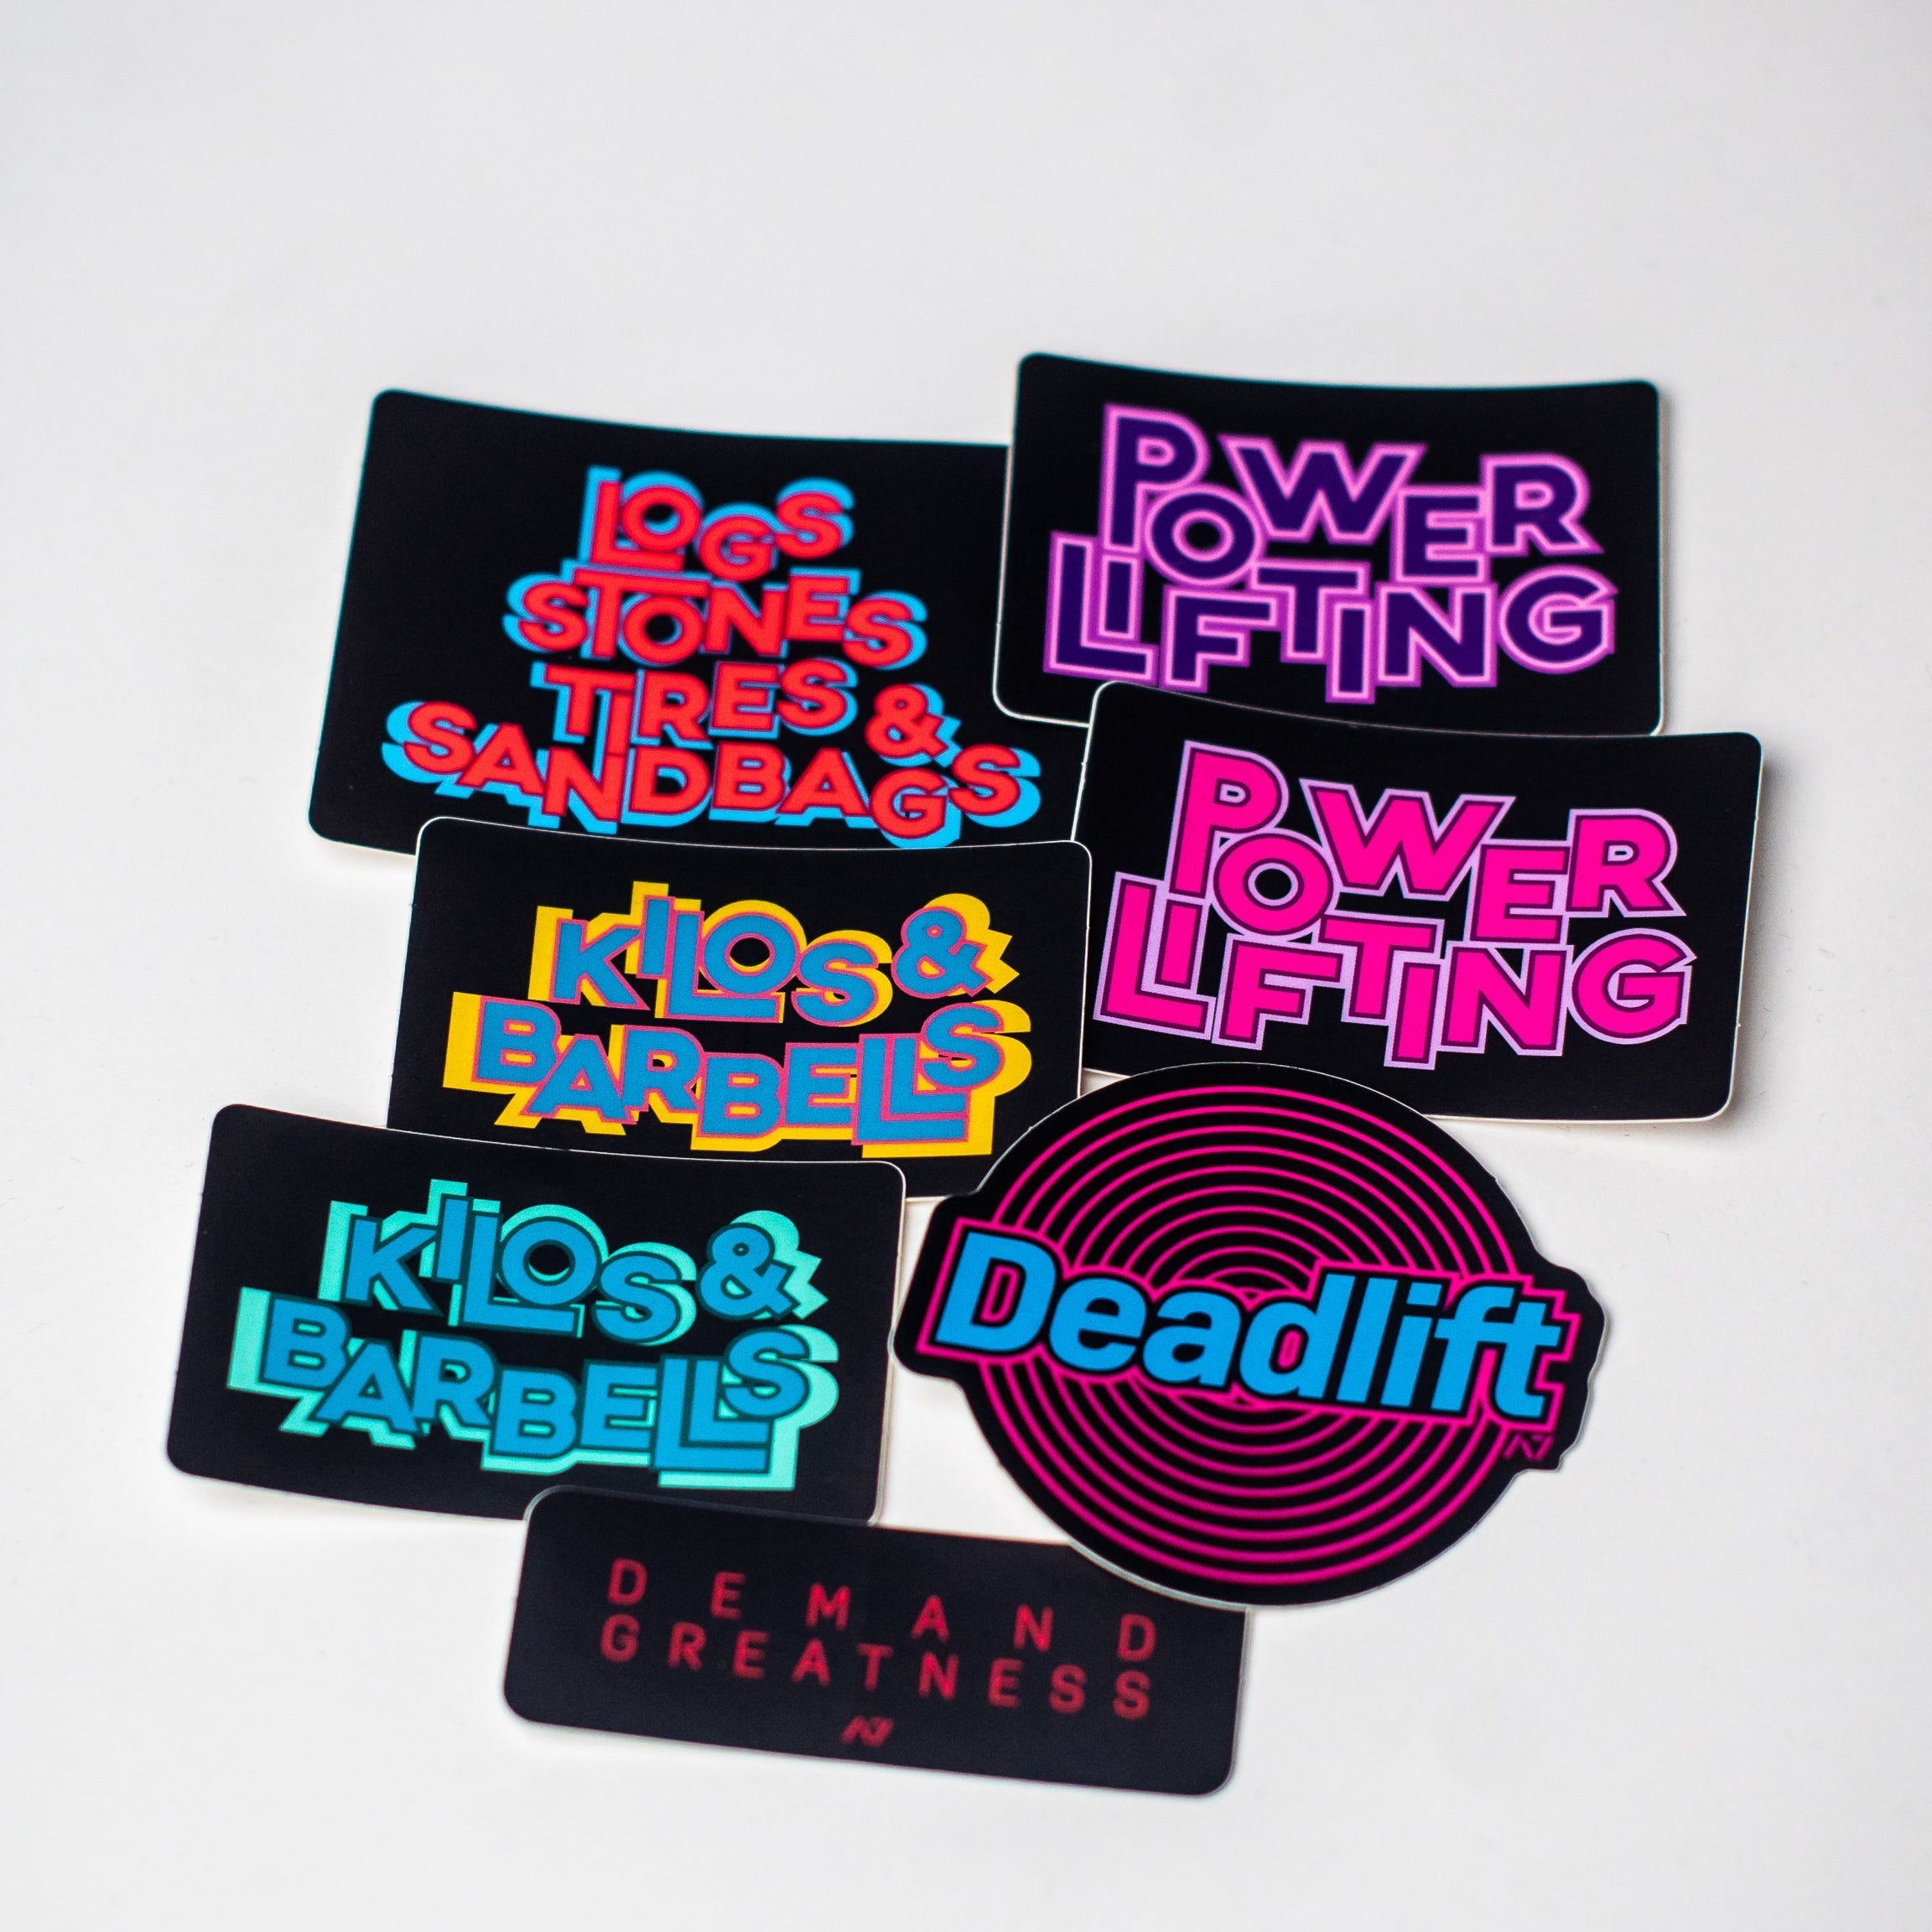 A7 Kilos and Barbells Aqua combines the dark with the fun and colourful designs to bring that pop of colour into the daily workouts. The sticker dye-cut, made from durable polypropylene and is 3 in wide x 2 in high. Purchase Kilos and Barbells Aqua Sticker from A7 UK.